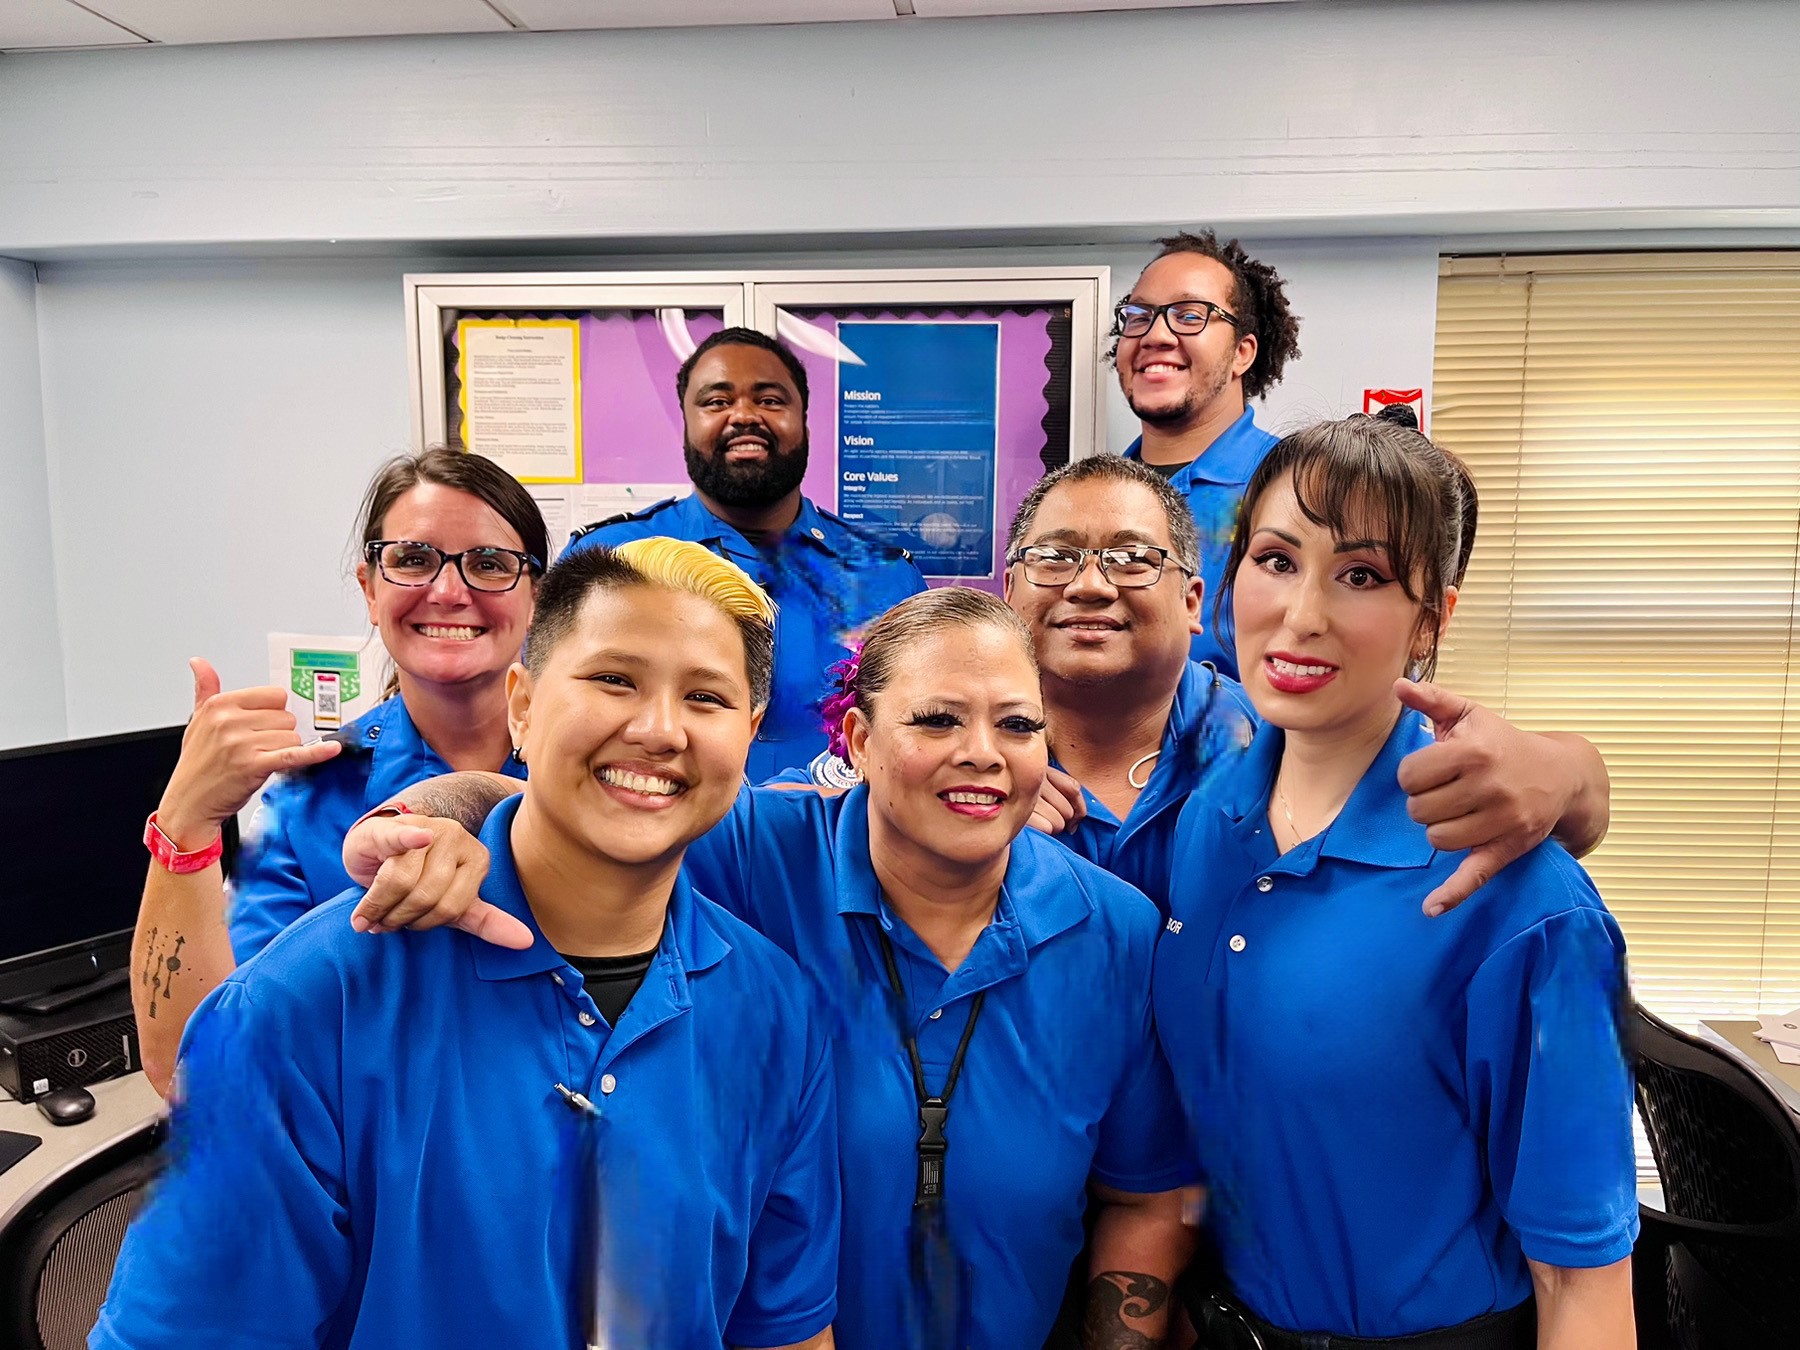 The Lihue Airport National Deployment Force Team. From left (back row), LIH Officers Christopher Demero and HNL Jared Dawkins; (middle row) HNL Lead Officer Catherine Cicak, Officer Tyrone Sabado; (front row) HNL Officer Dhyrille Rioca, Lead Officer Sharilynn Requilman and TSA Manager Reimion McBean.